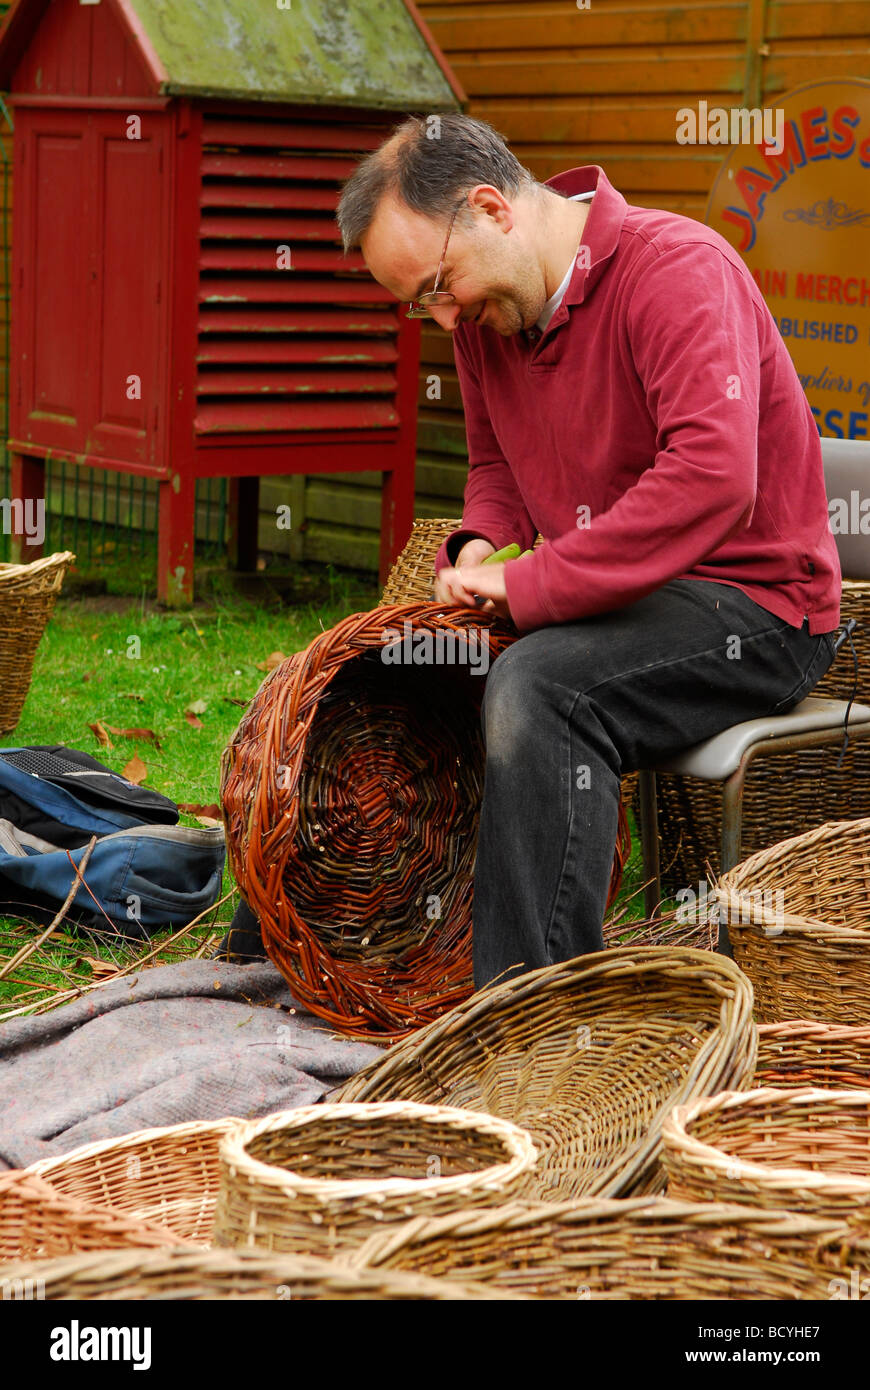 Rustic Sunday event at Rural Life Centre, Tilford, near Farnham, Surrey UK. A Celebration of rural and traditional ways of life. Stock Photo